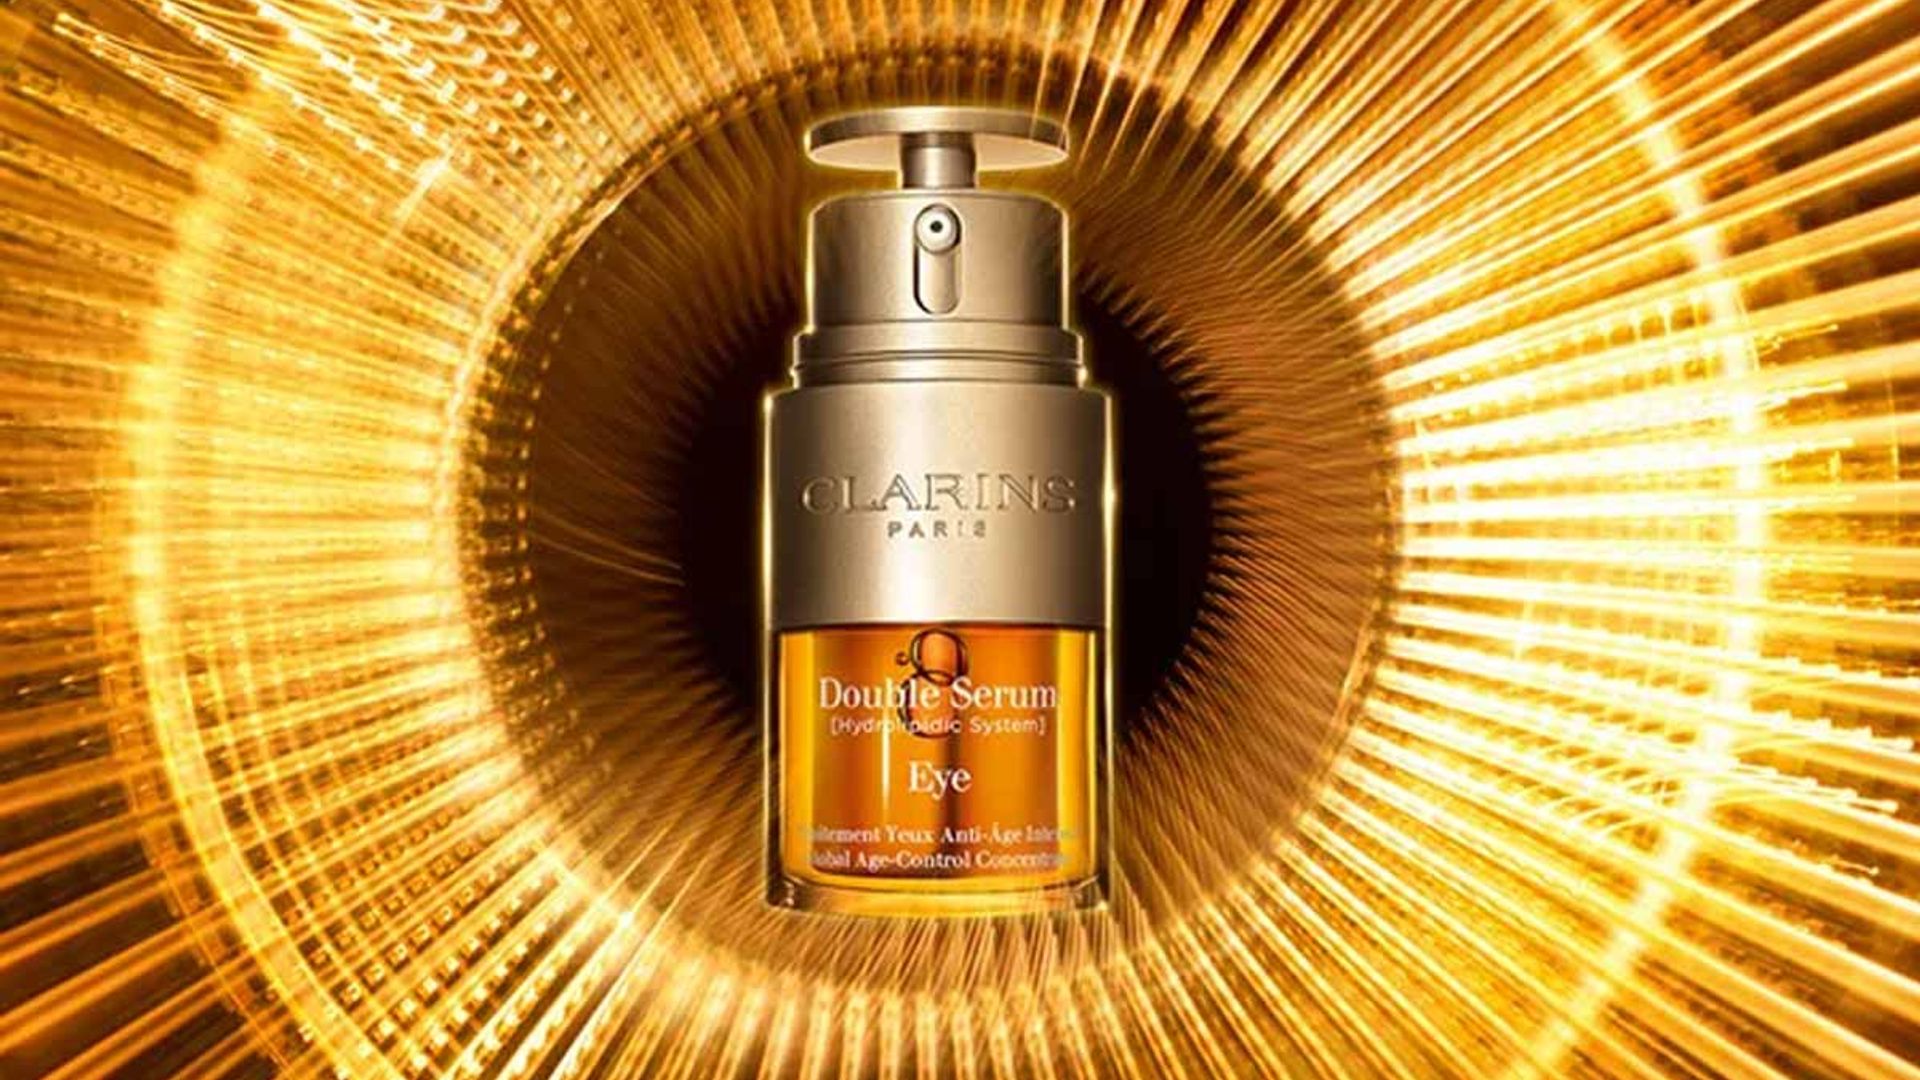 Clarins just dropped the game-changing Double Serum Eye - and fans are already rating it 5 stars